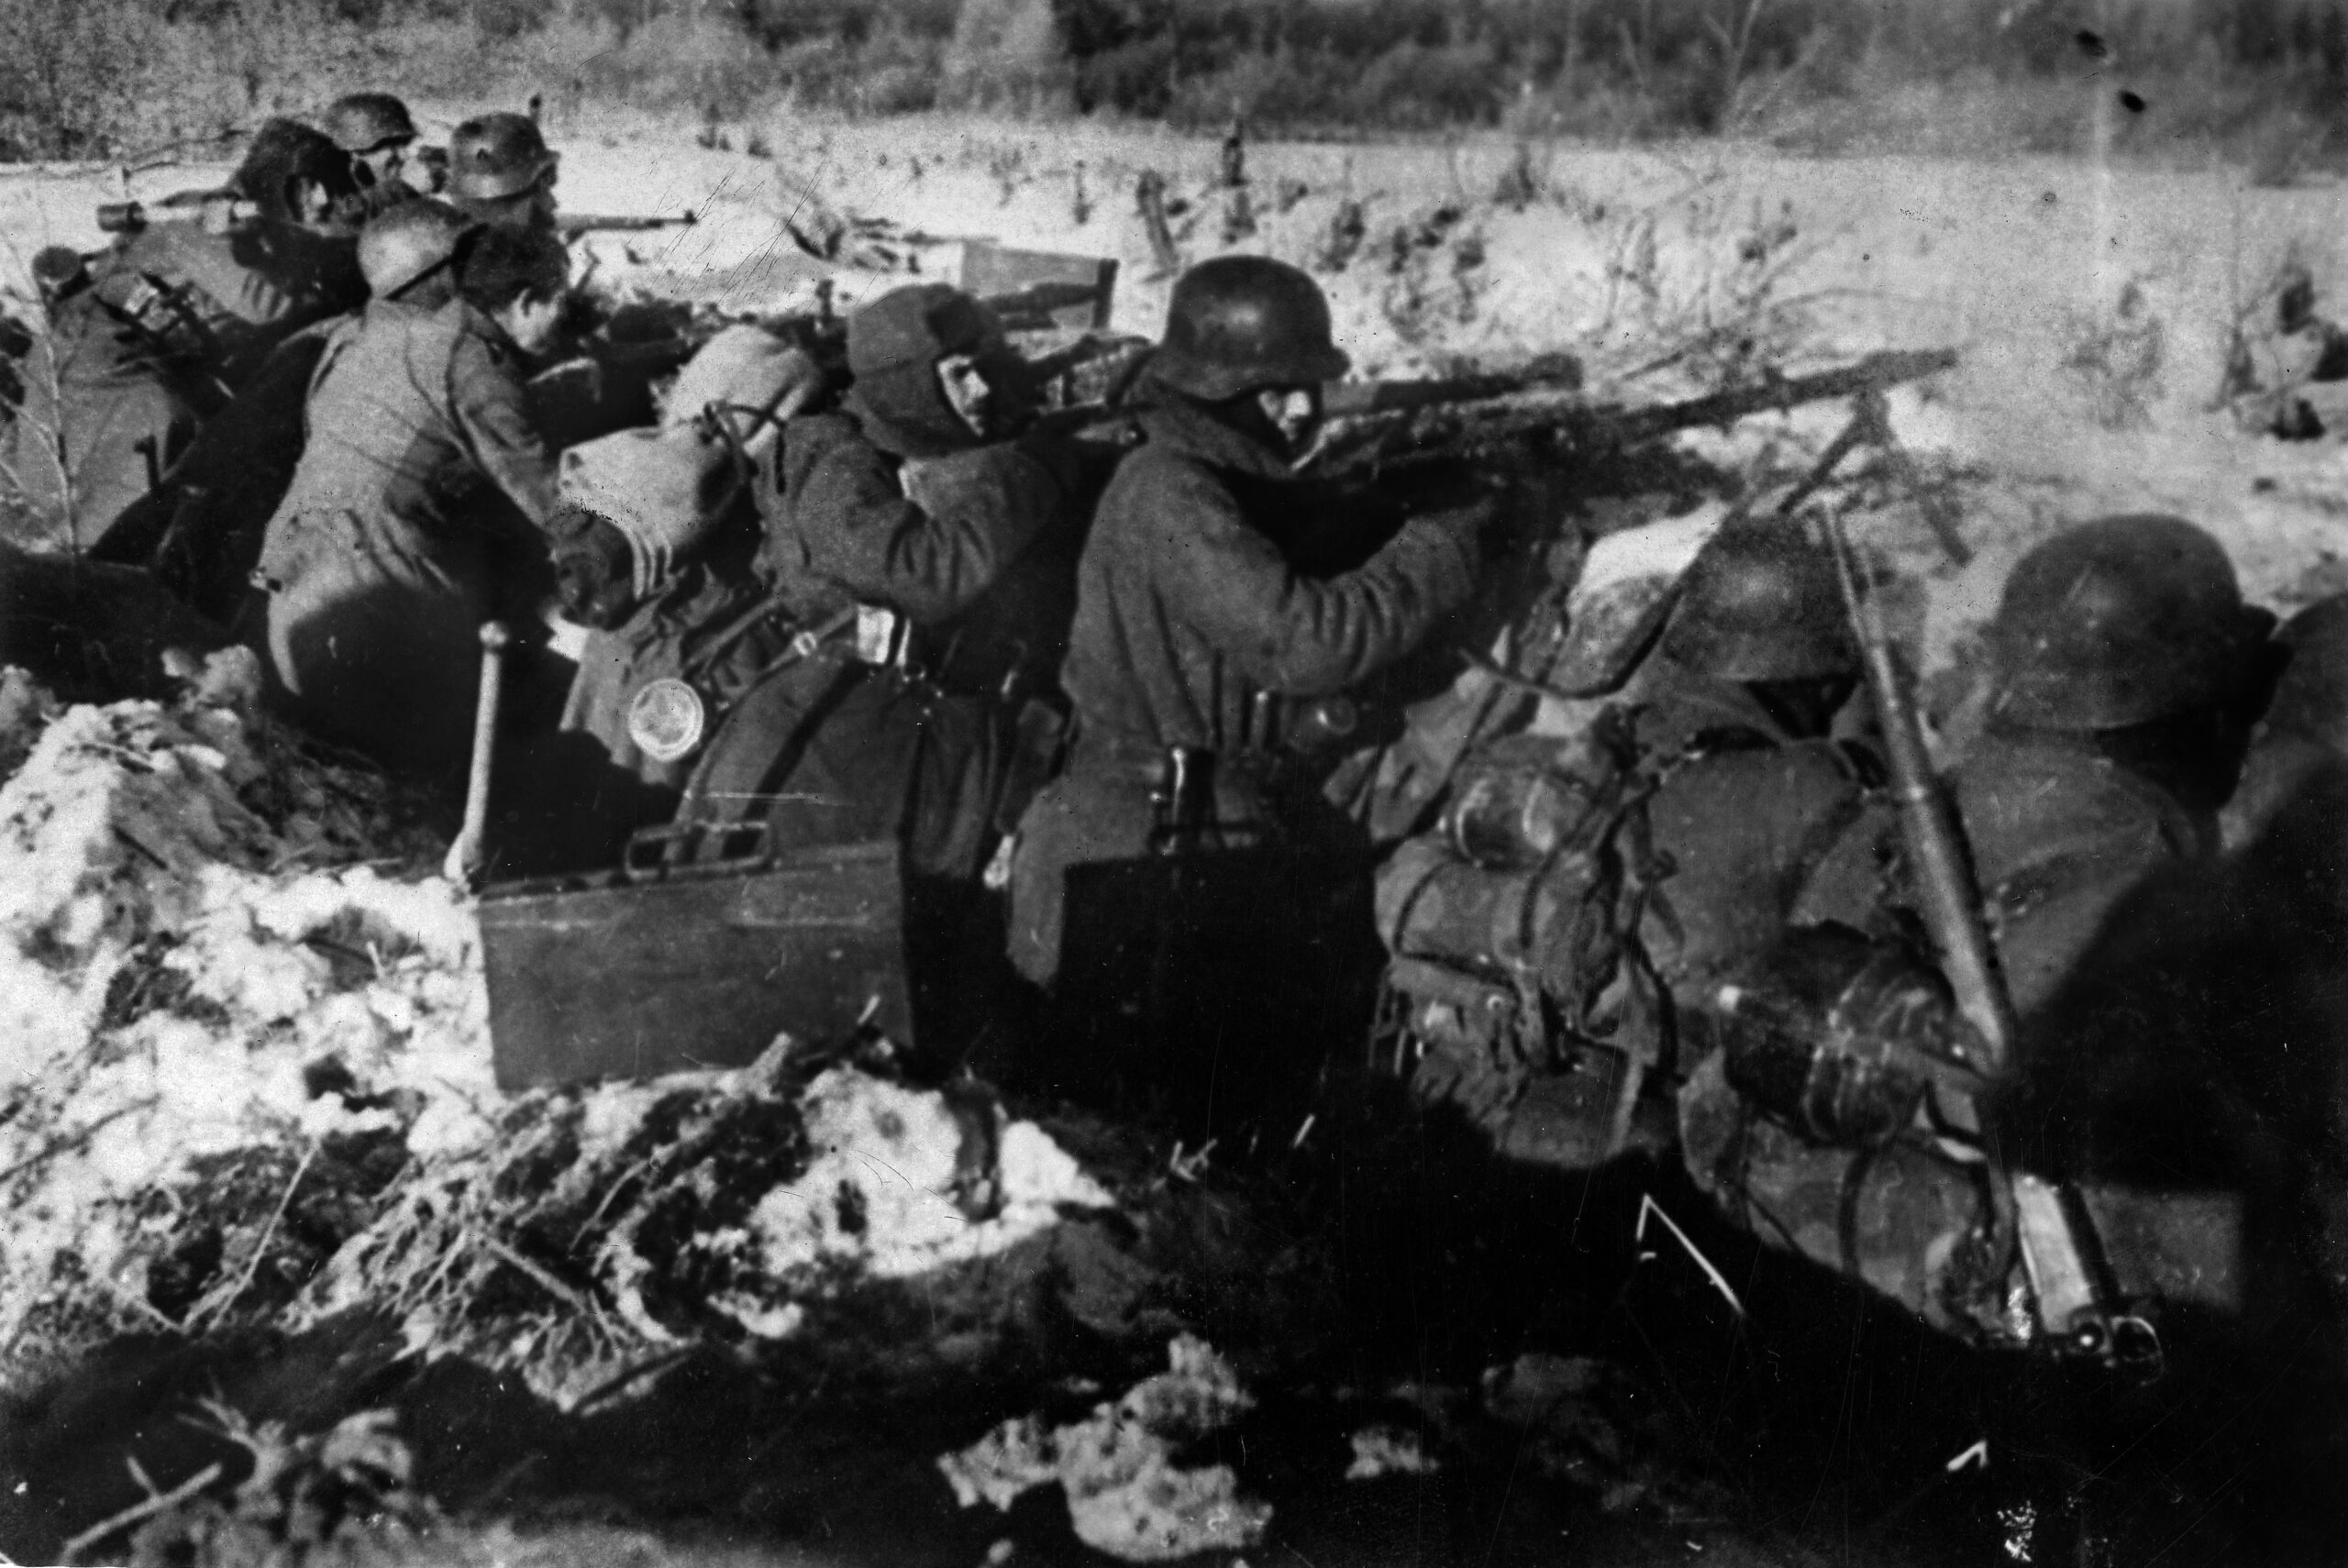 Wearing German-patterned uniforms and helmets and using German weapons, the all-volunteer Spanish Blue Division takes part in a winter battle against the Soviet Red Army near Leningrad. Spanish leader Francisco Franco’s fear and hatred of communism made the volunteers eager to side with Nazi Germany and fight against the common foe. More than 20,000 Spaniards served in the fight against the Soviet Union, but few came home alive.